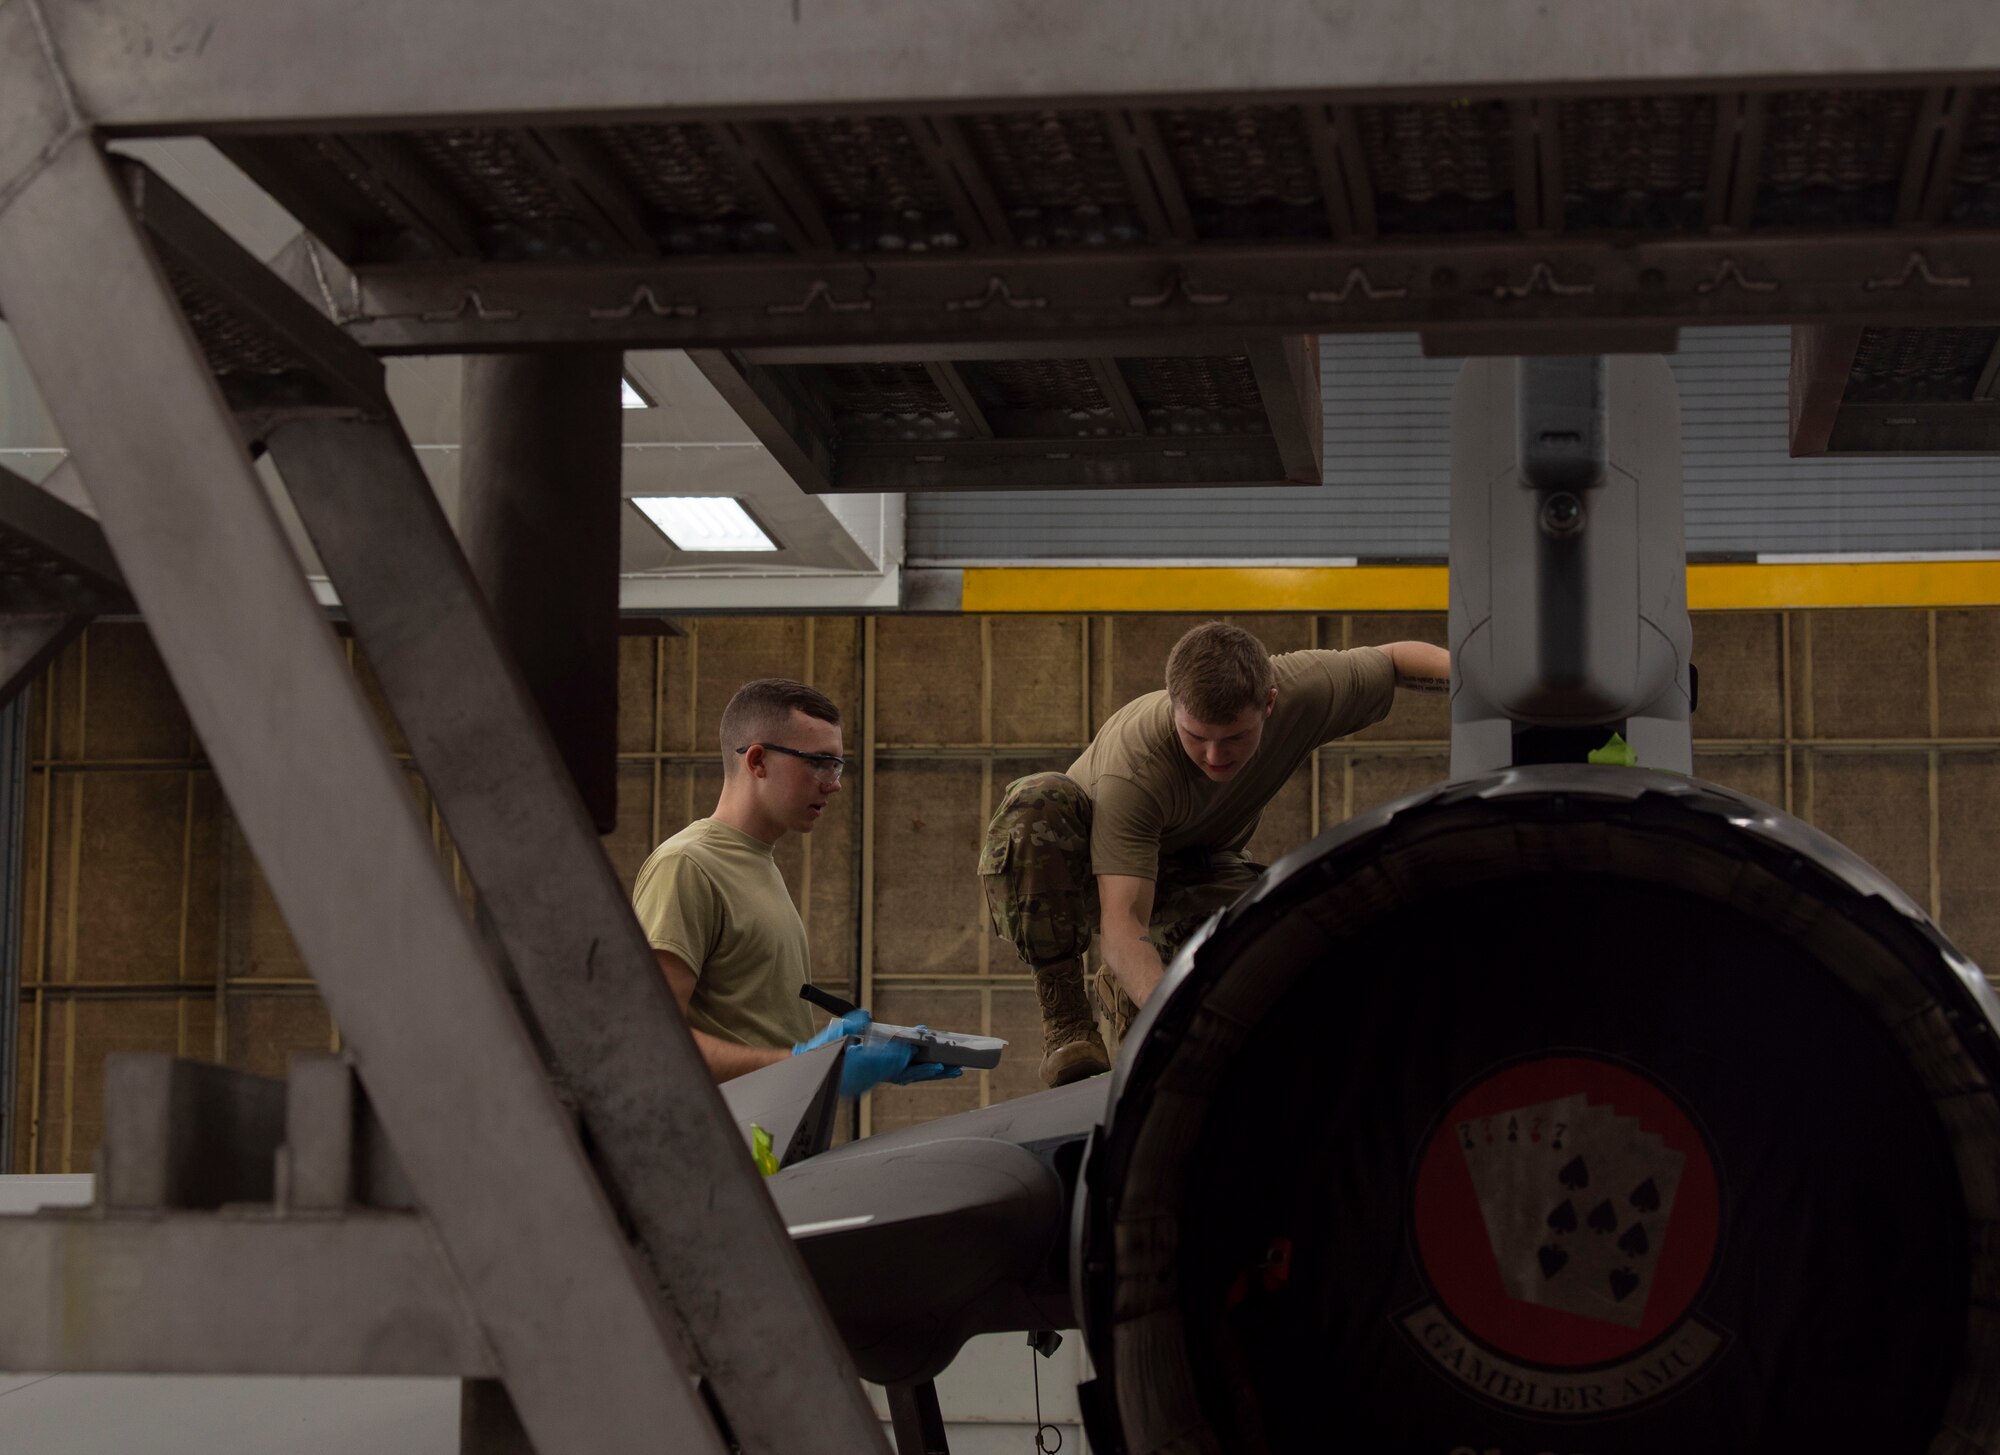 U.S. Air Force Airman 1st Class Holden Nieman and Senior Airman Daniel Meadows, 20th Equipment Maintenance Squadron aircraft structural maintainers, work together to paint a decal on the side of an F-16CM Viper at Shaw Air Force Base, South Carolina, June 20, 2019.